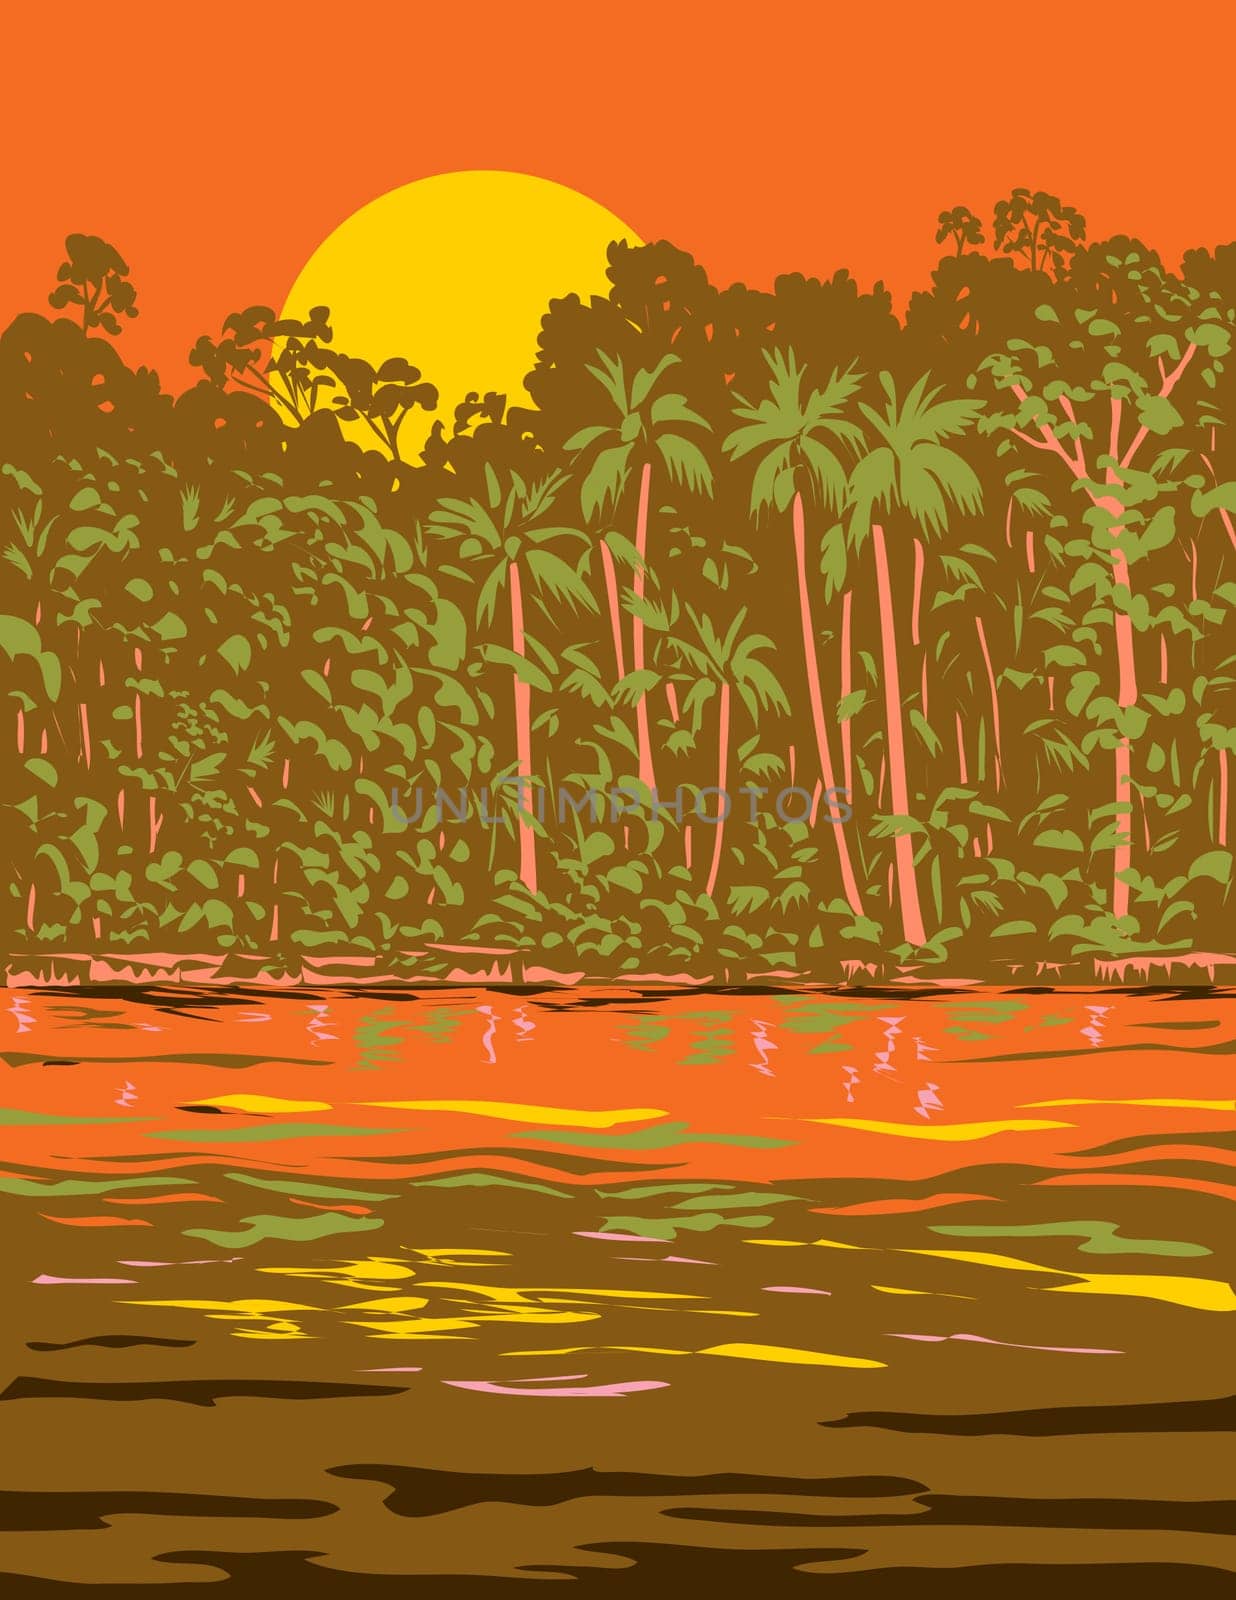 WPA poster art of the Amazon River or Rio Amazonas in Brazil, South America done in works project administration or Art Deco style.